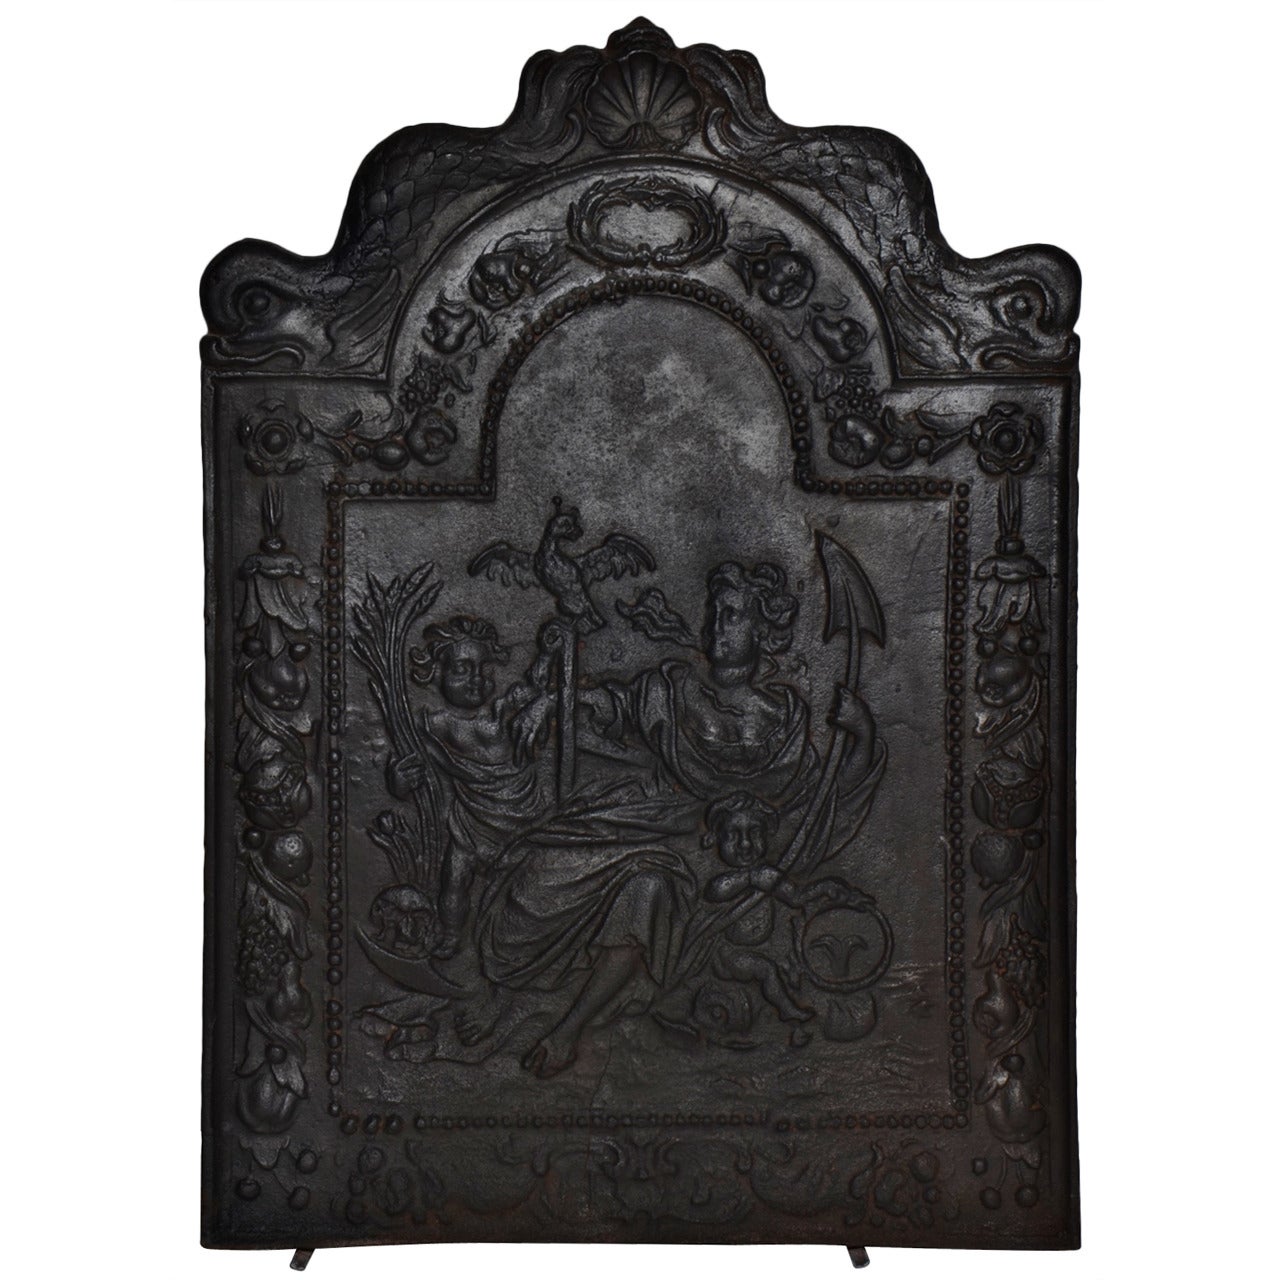 17th c. Antique Cast Iron Fireback Displaying "Spes" The Goddess Hope For Sale